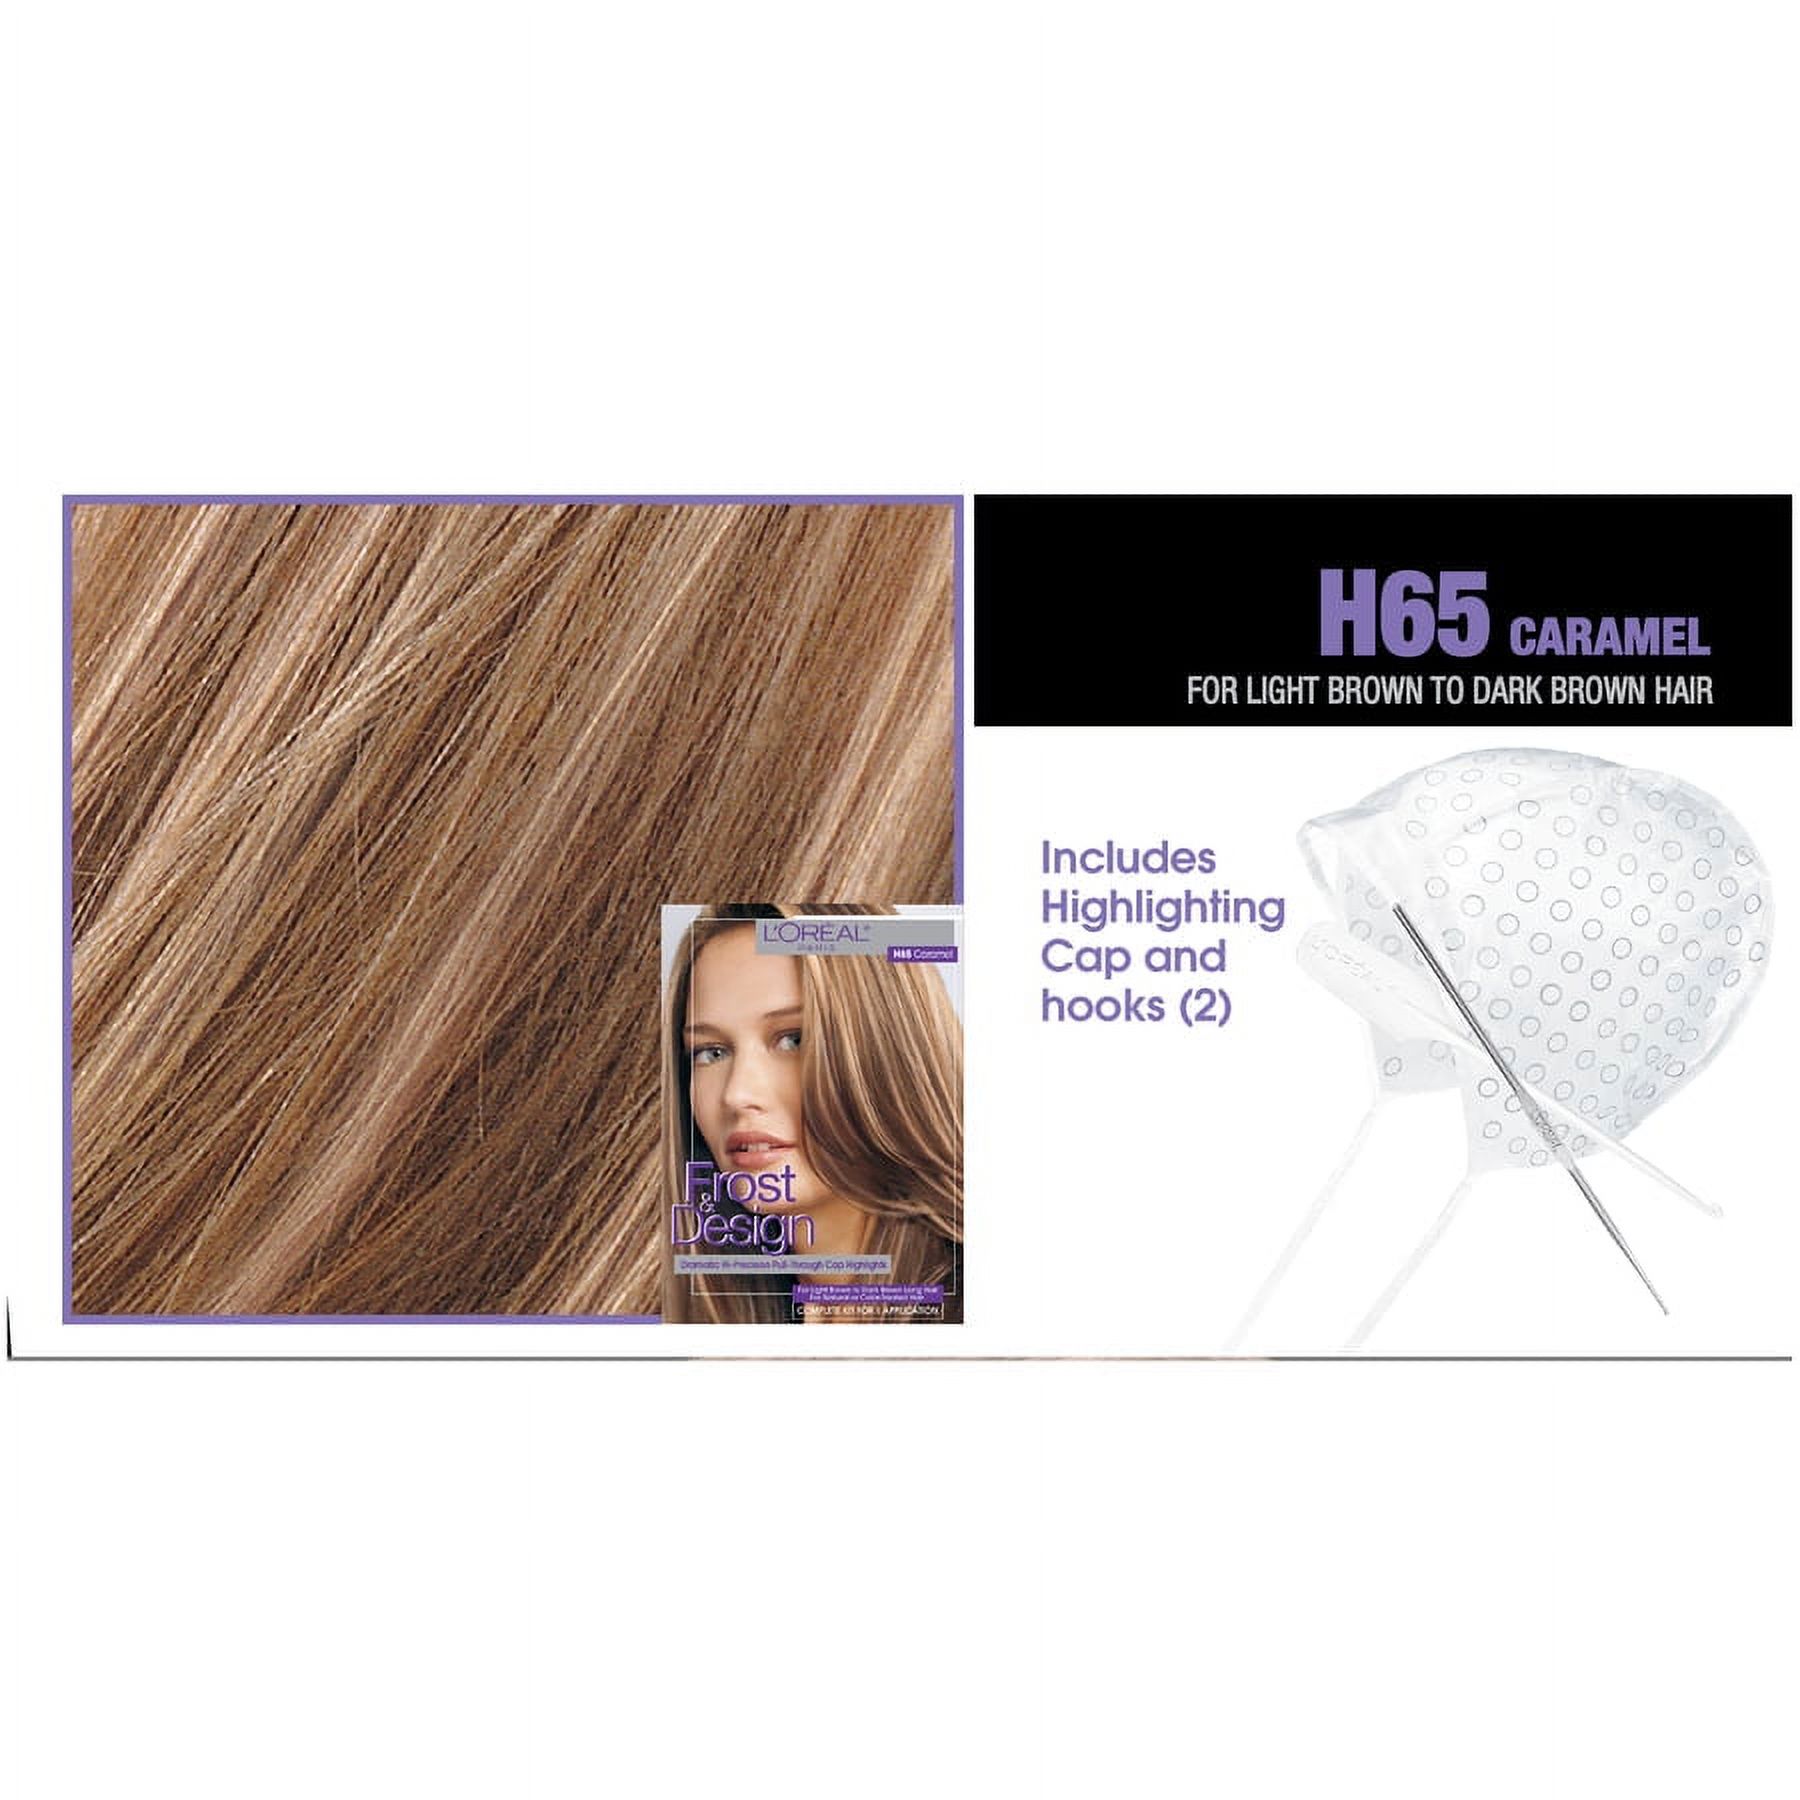 L'Oreal Paris Frost And Design Permanent Hair Color, H65 Caramel - image 4 of 14